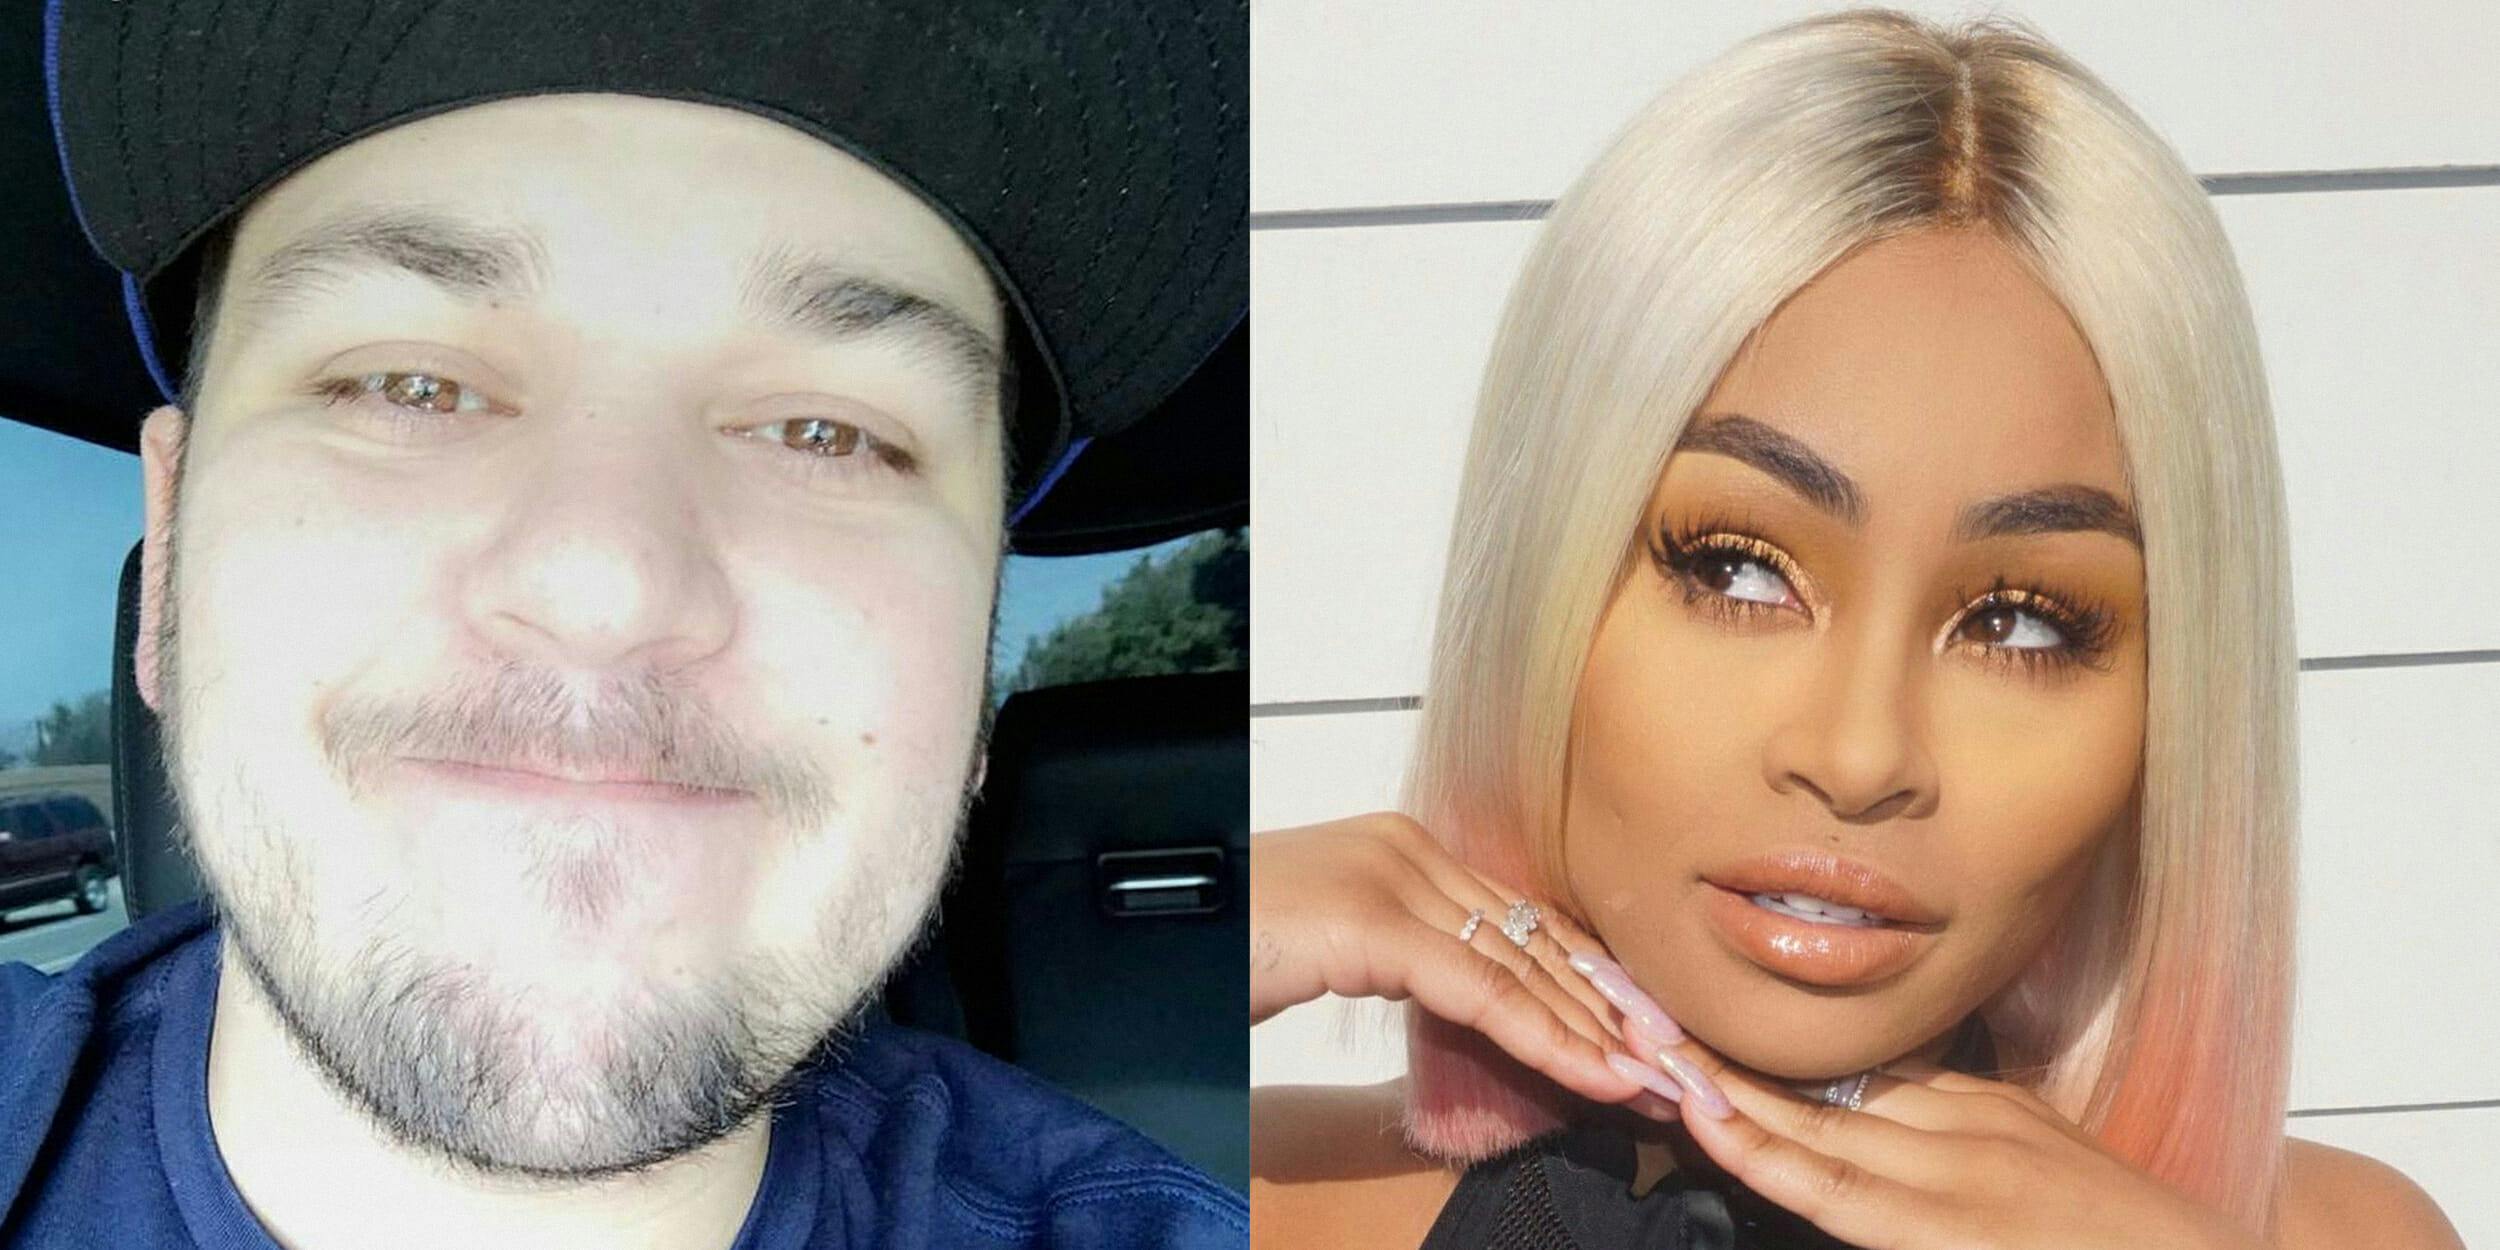 Kate Upton Facial Porn - Blac Chyna Gives a Face to the Long-Fought Battle Against Revenge Porn